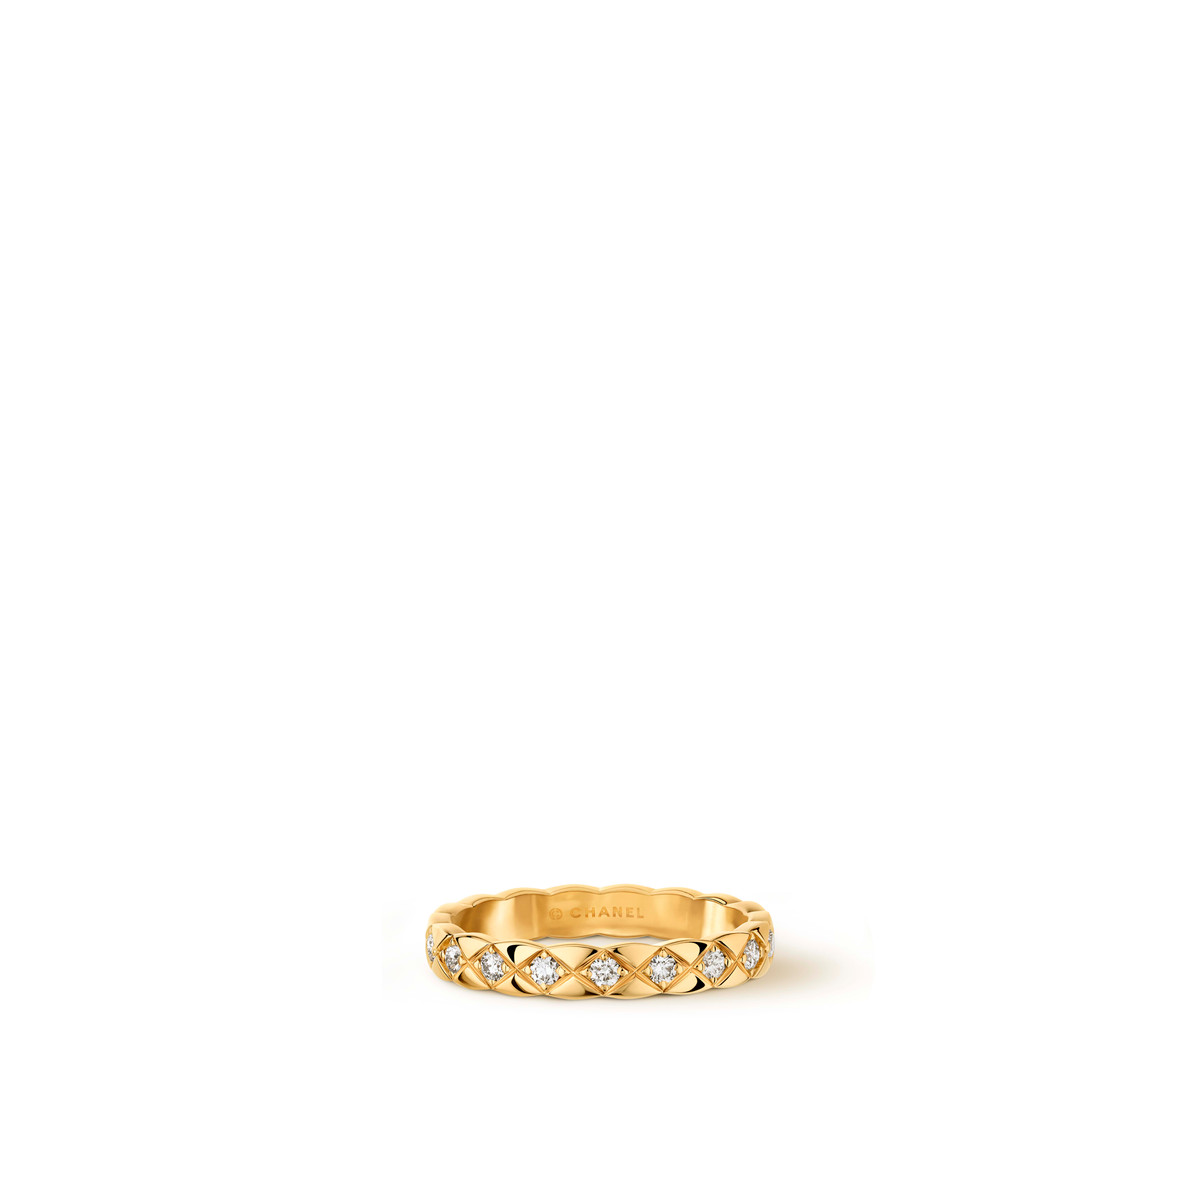 CHANEL COCO CRUSH RING-22512 Product Image